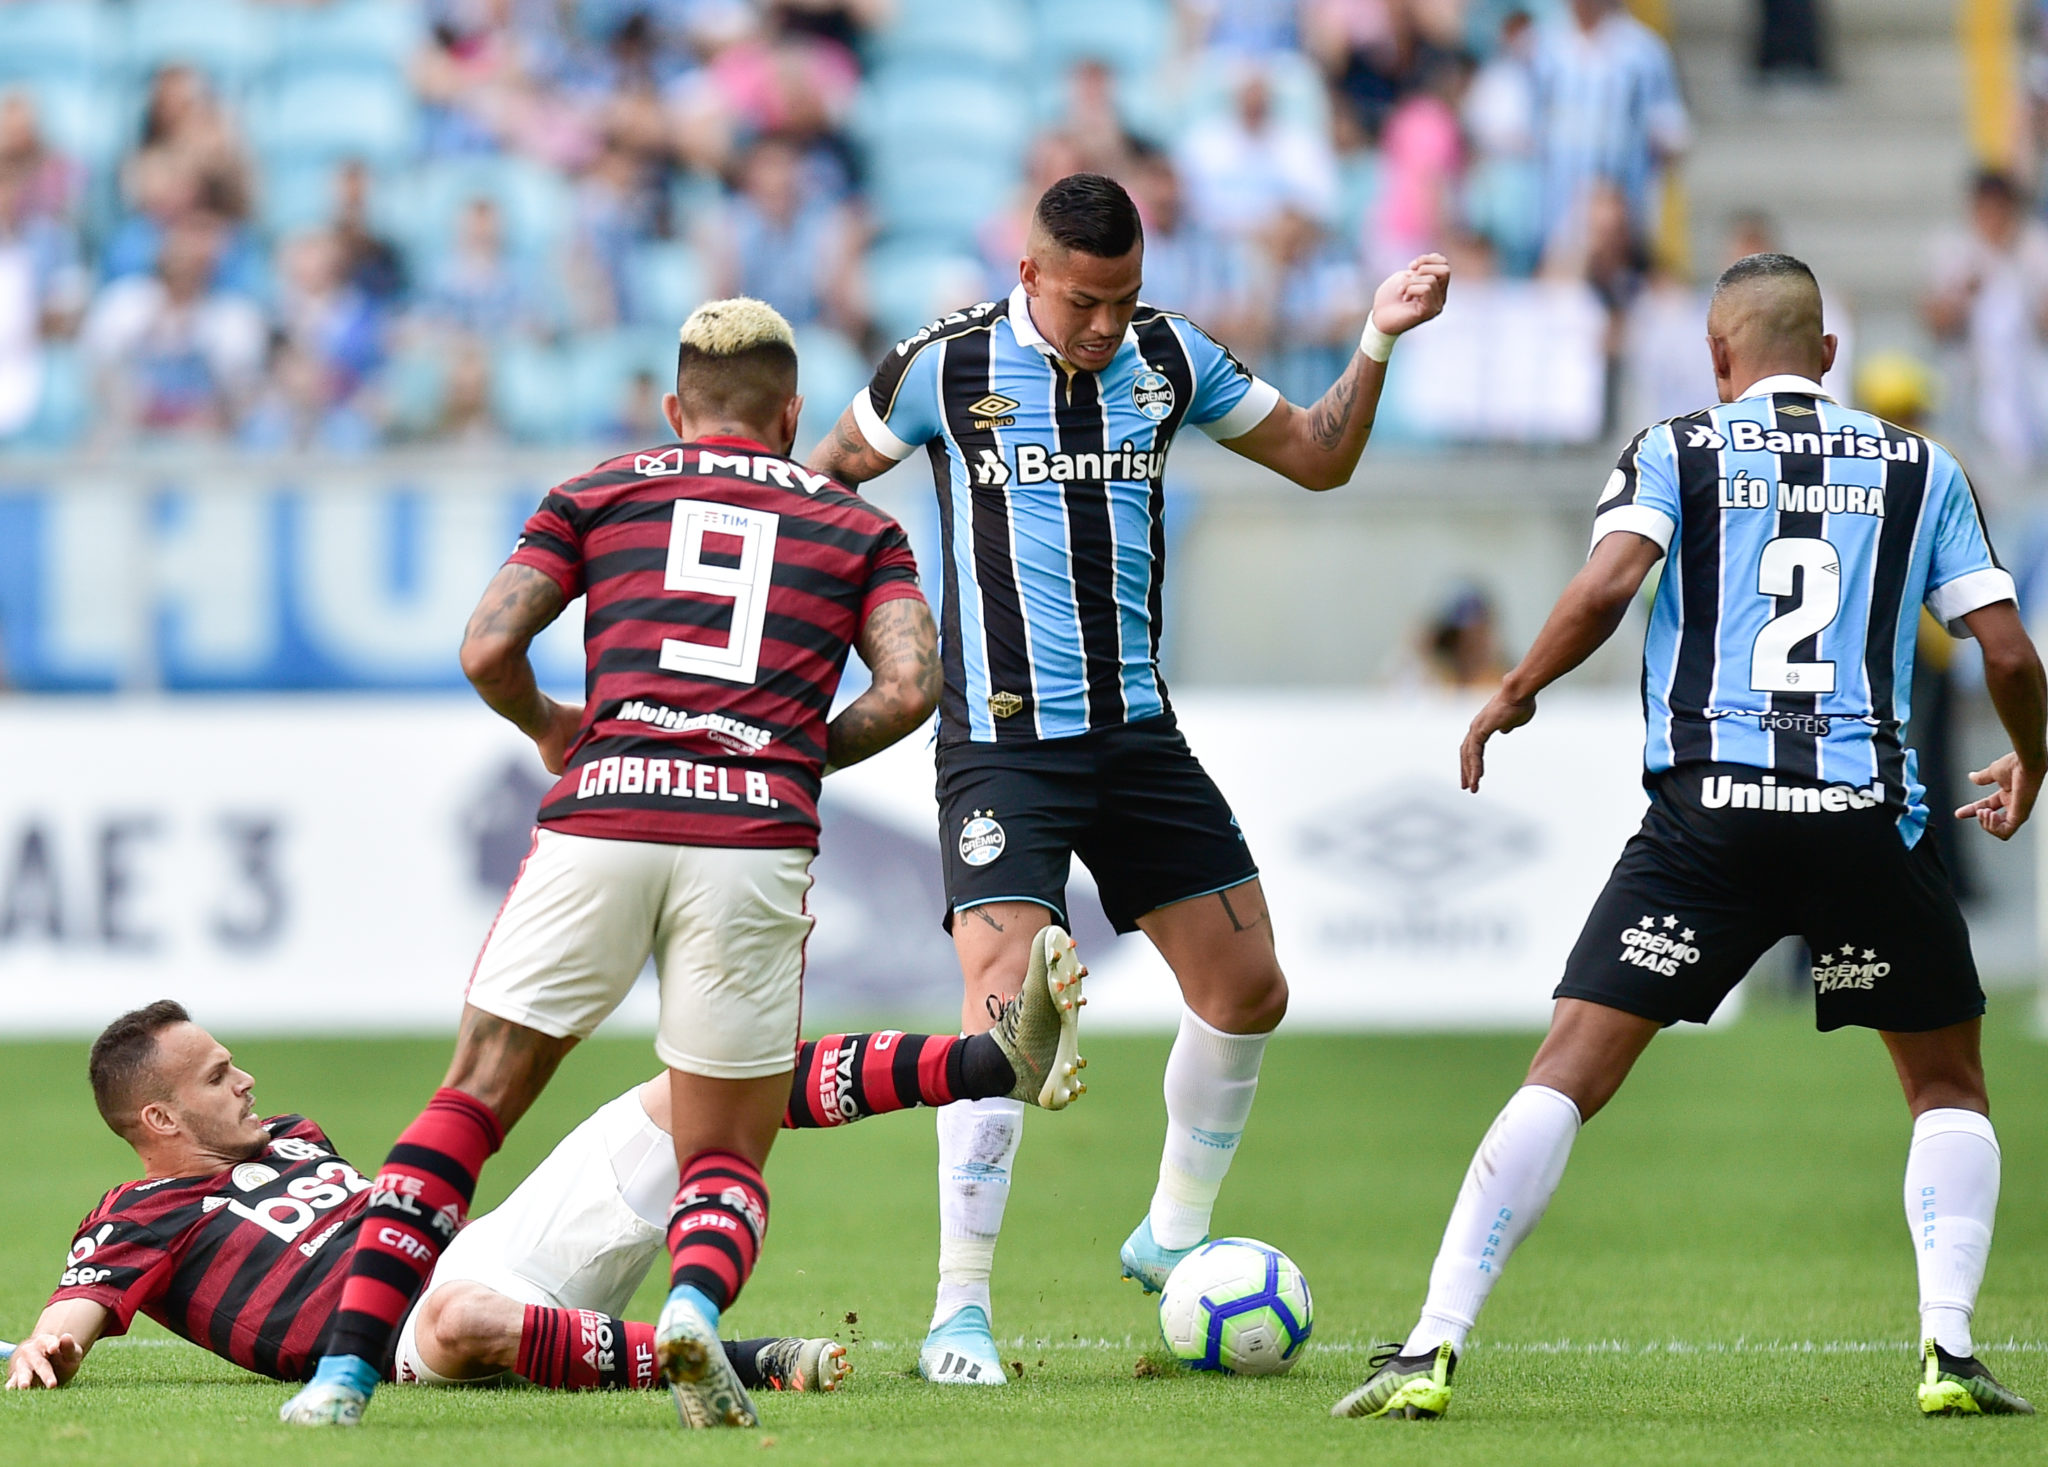 PORTO ALEGRE, BRAZIL - NOVEMBER 17: Luciano#18 and Leo Moura #2 of Gremio fight for the ball against Rene #6 and Gabriel #9 of Flamengo during a match between Gremio and Flamengo as part of Brasileirao Series A 2019 at Arena do Gremio on November 17, 2019 in Porto Alegre, Brazil. (Photo by Juliana Flister/Getty Images)